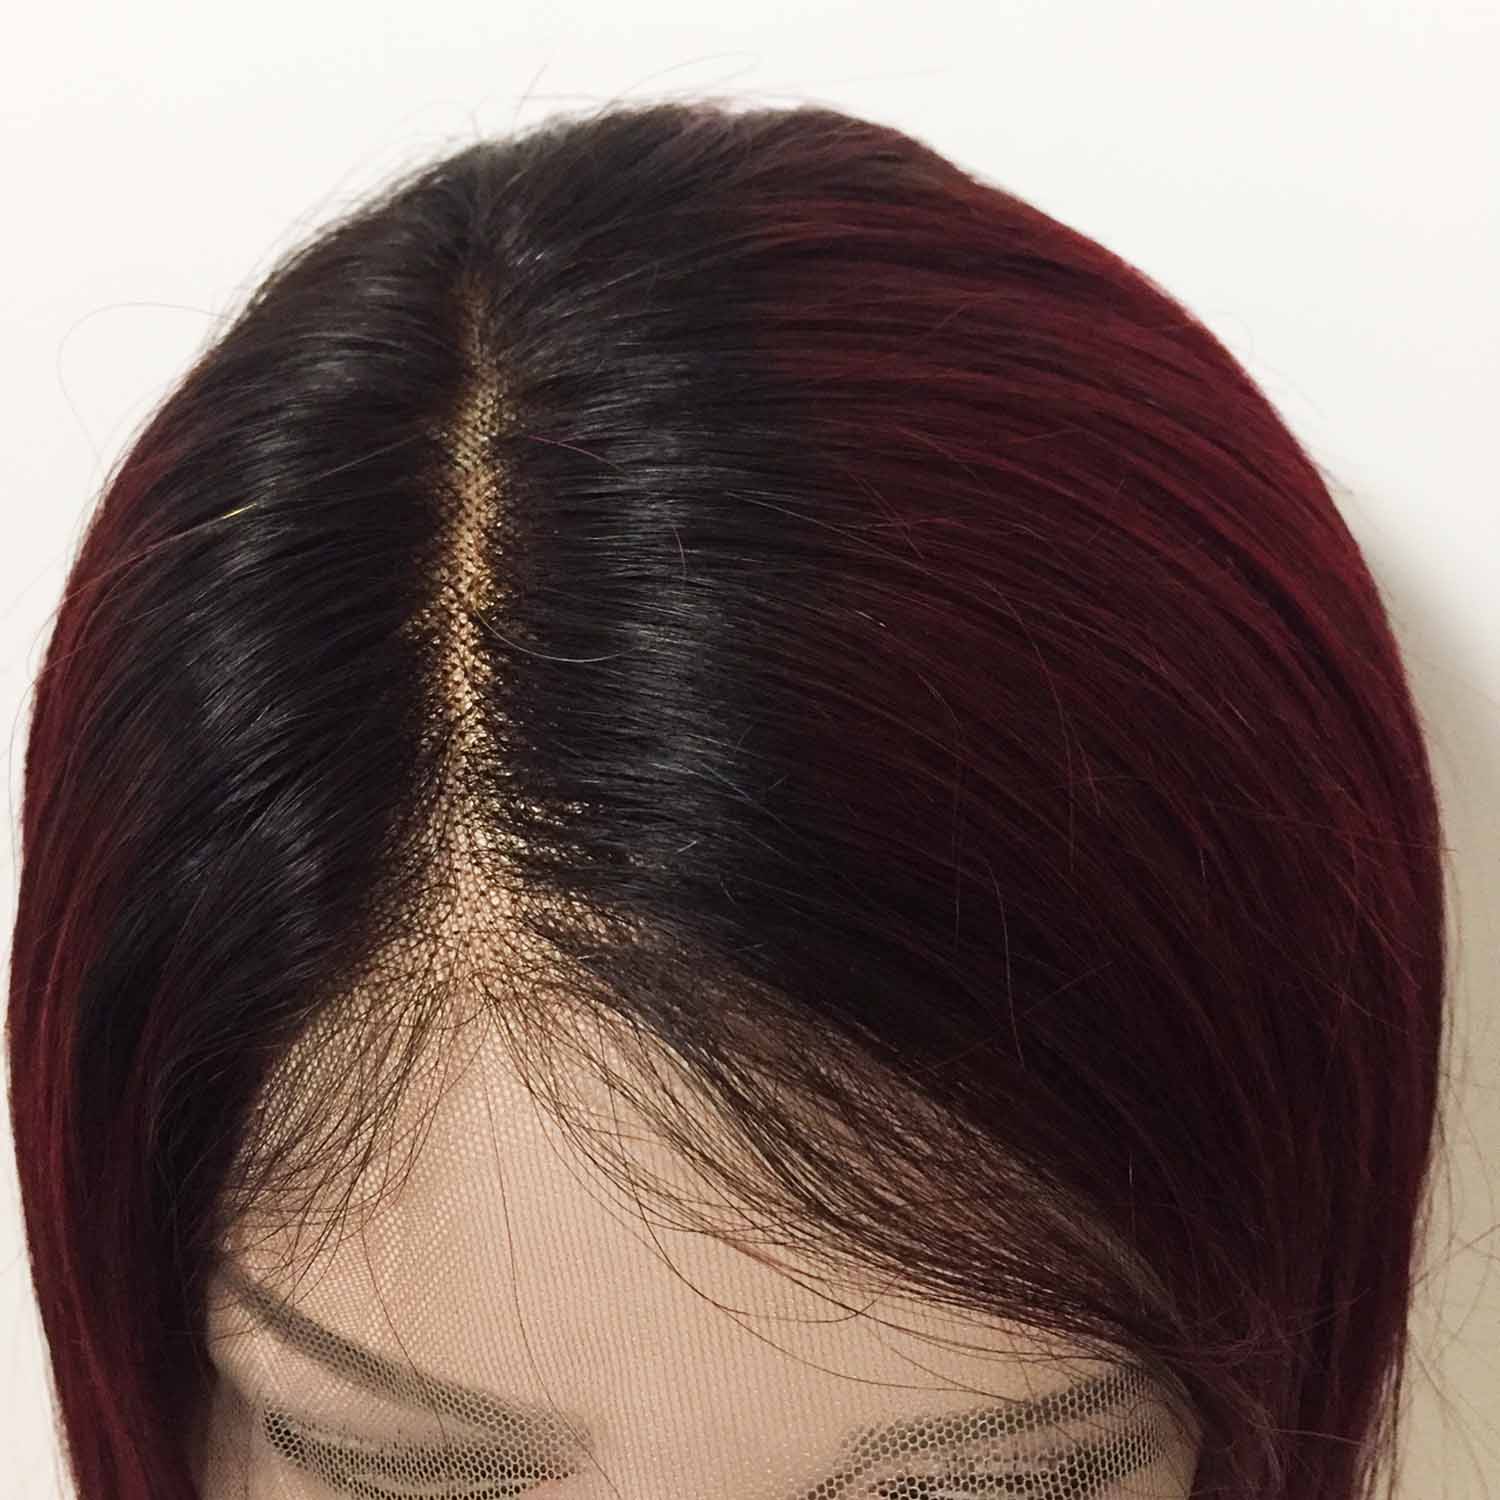 nevermindyrhead Women Dark Red Ombre Human Hair Lace Front Short Straight Wig